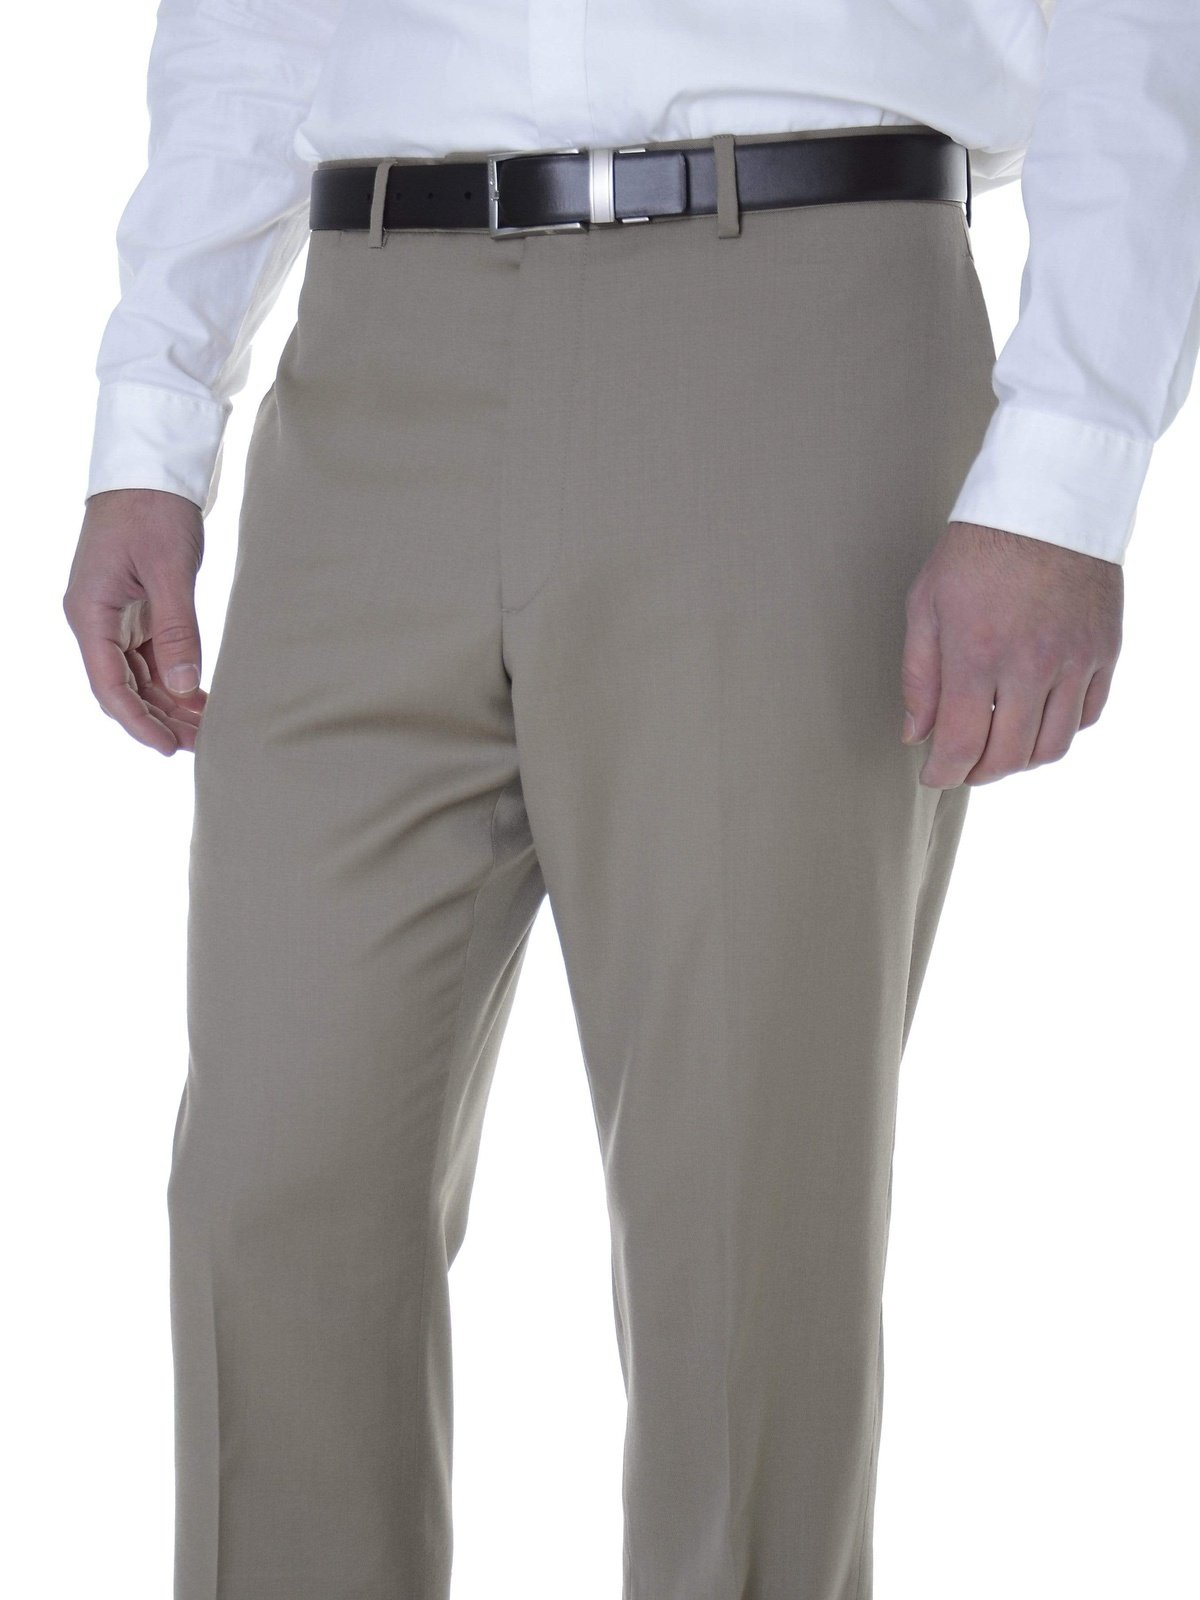 Tommy Hilfiger Trim Fit Solid Khaki Tan Flat Front Worsted Wool Dress Pants - The Suit Depot